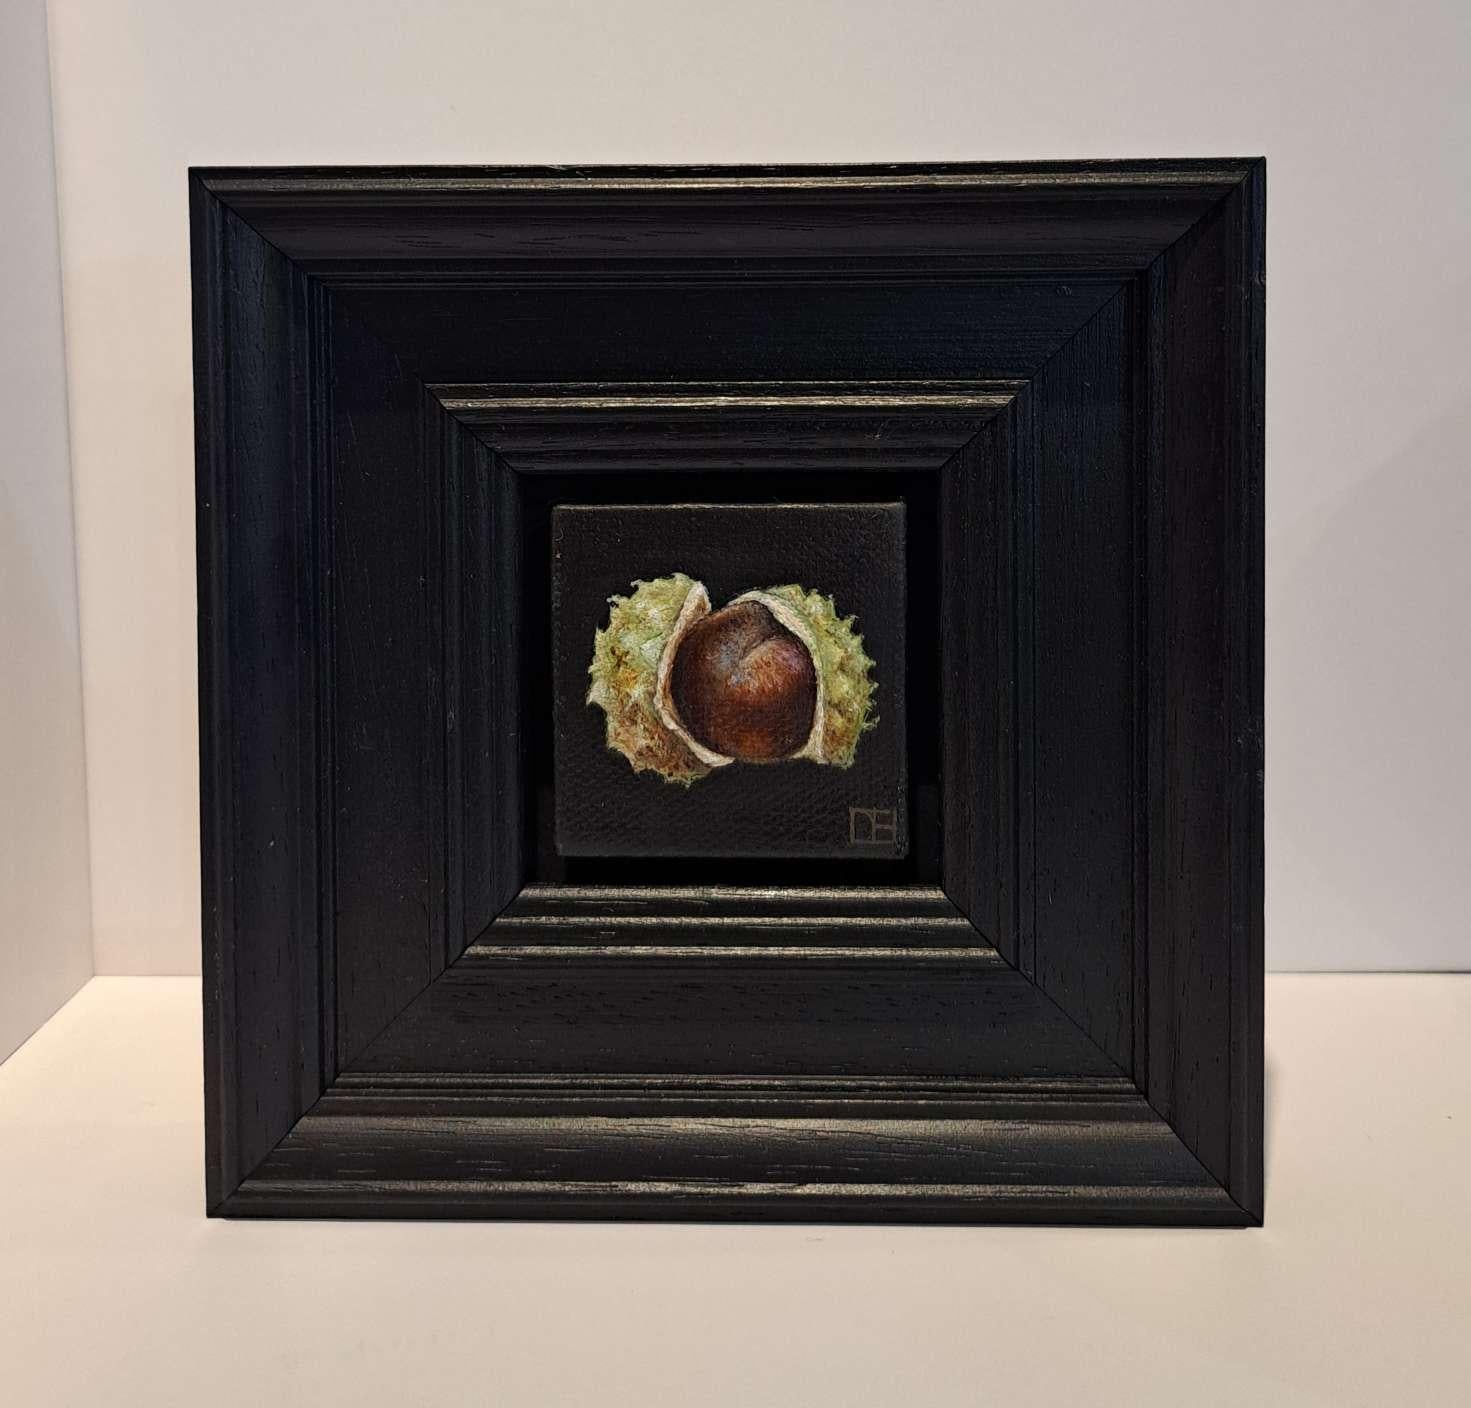 Pocket Conker and Shell 2 c, Original Baroque Still Life Painting, Small - Black Interior Painting by Dani Humberstone